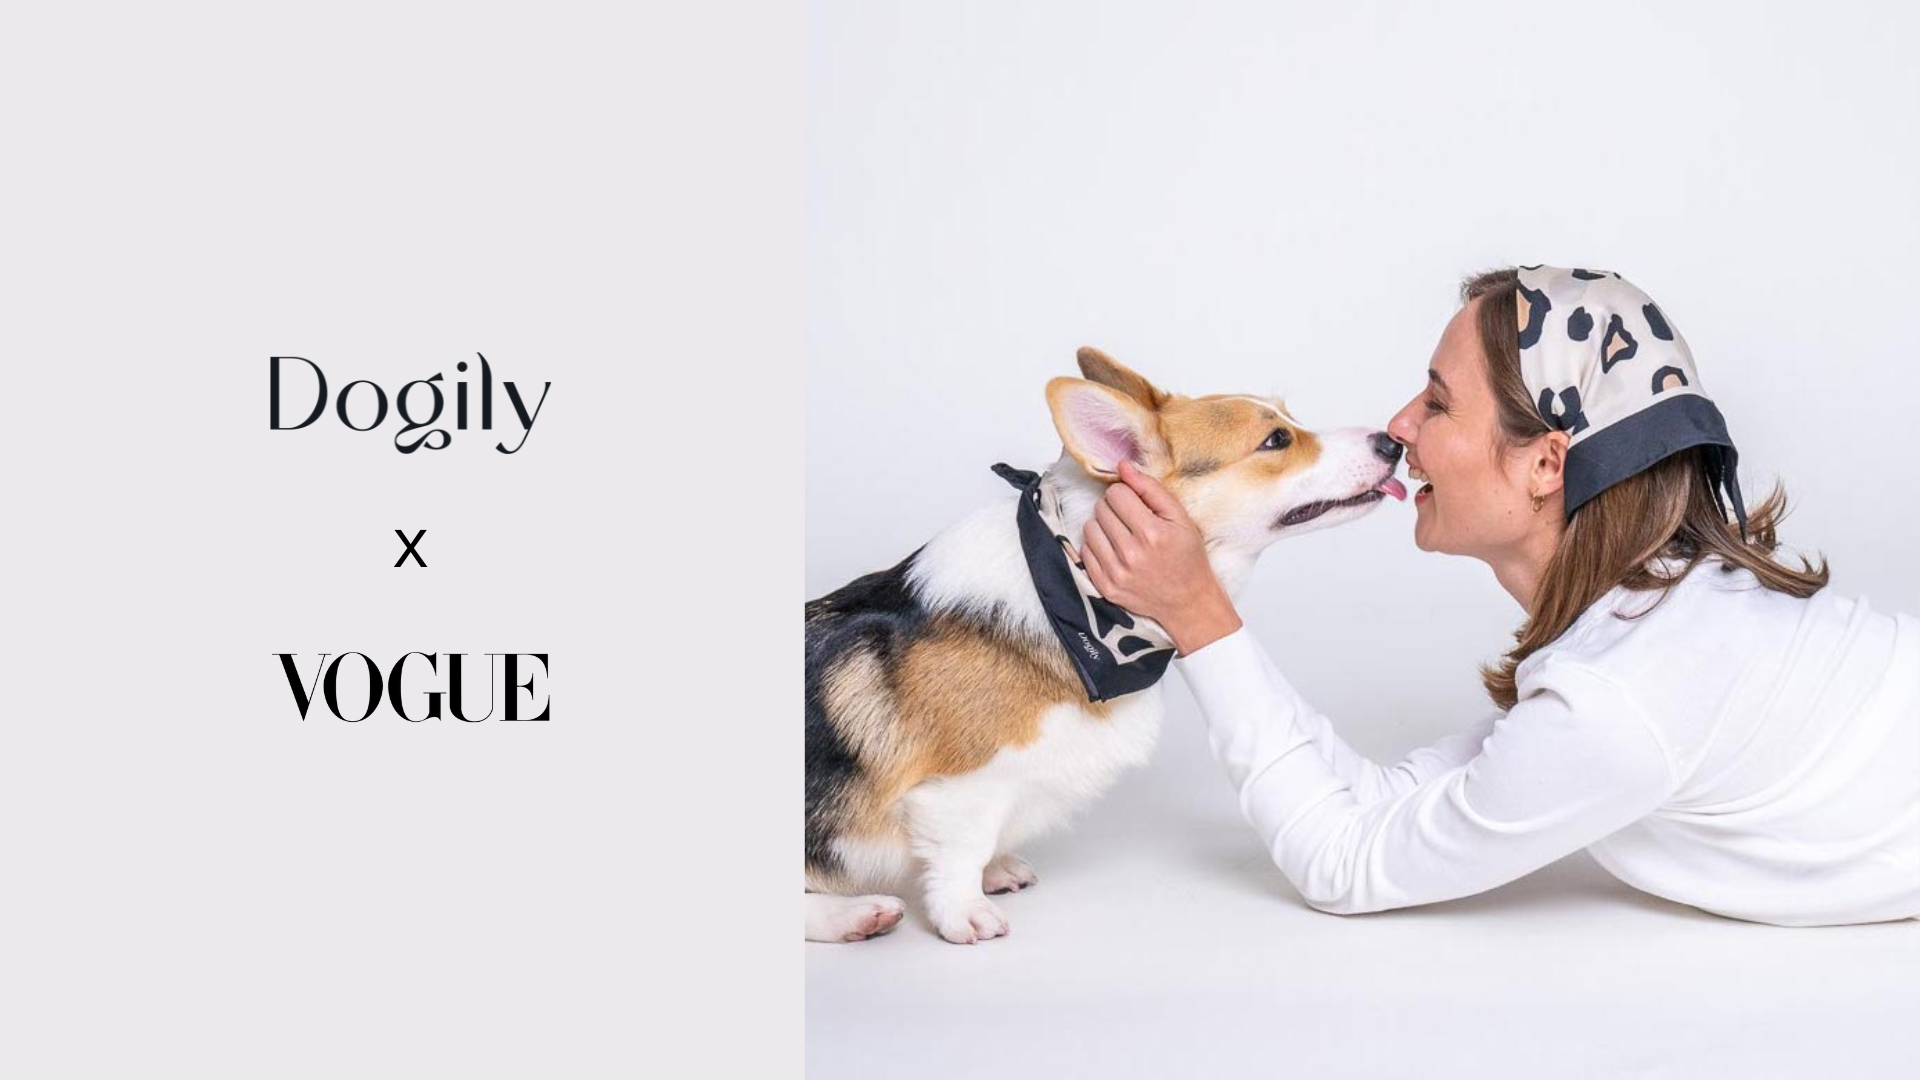 Dogily turns your daily dog walk into a fashion show | Vogue